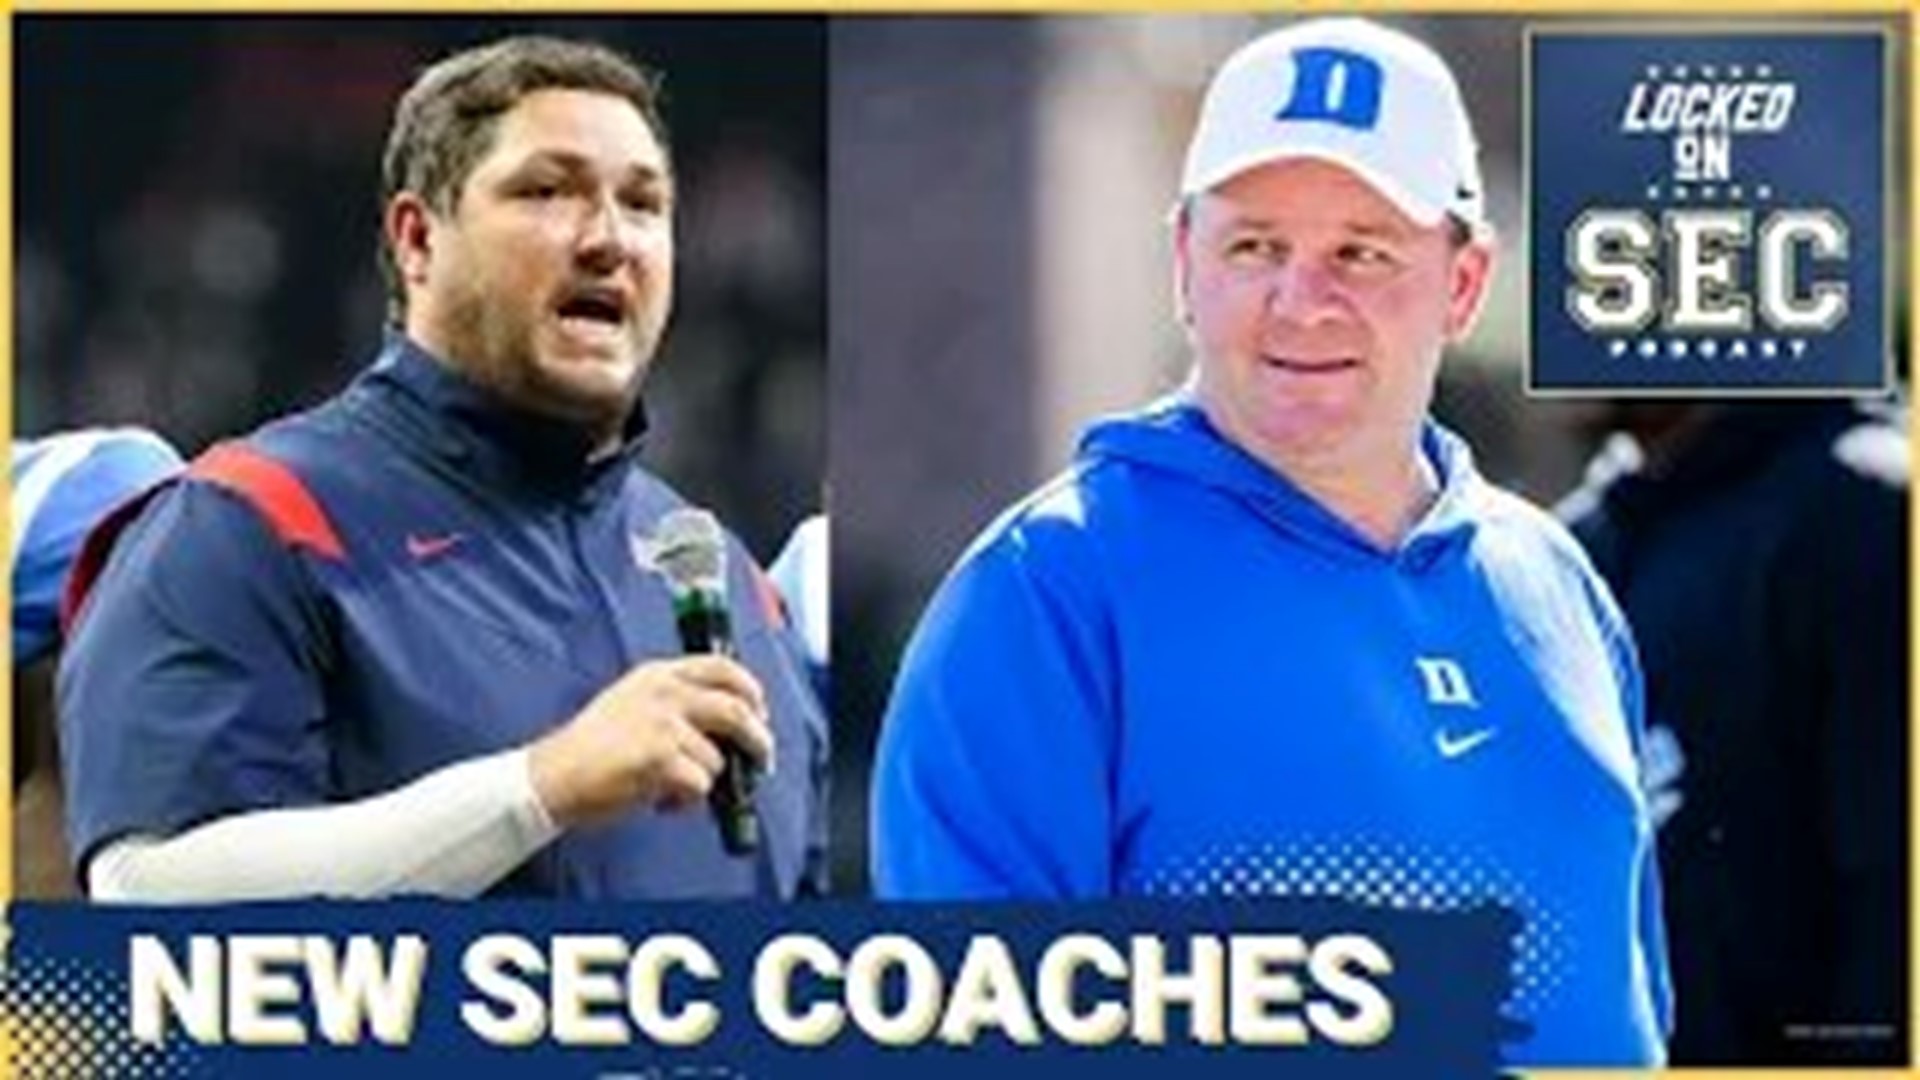 Big news as two new coaches take over in the SEC: Texas A&M pivots to hiring Mike Elko, after a weekend of interest in Kentucky's Mark Stoops.